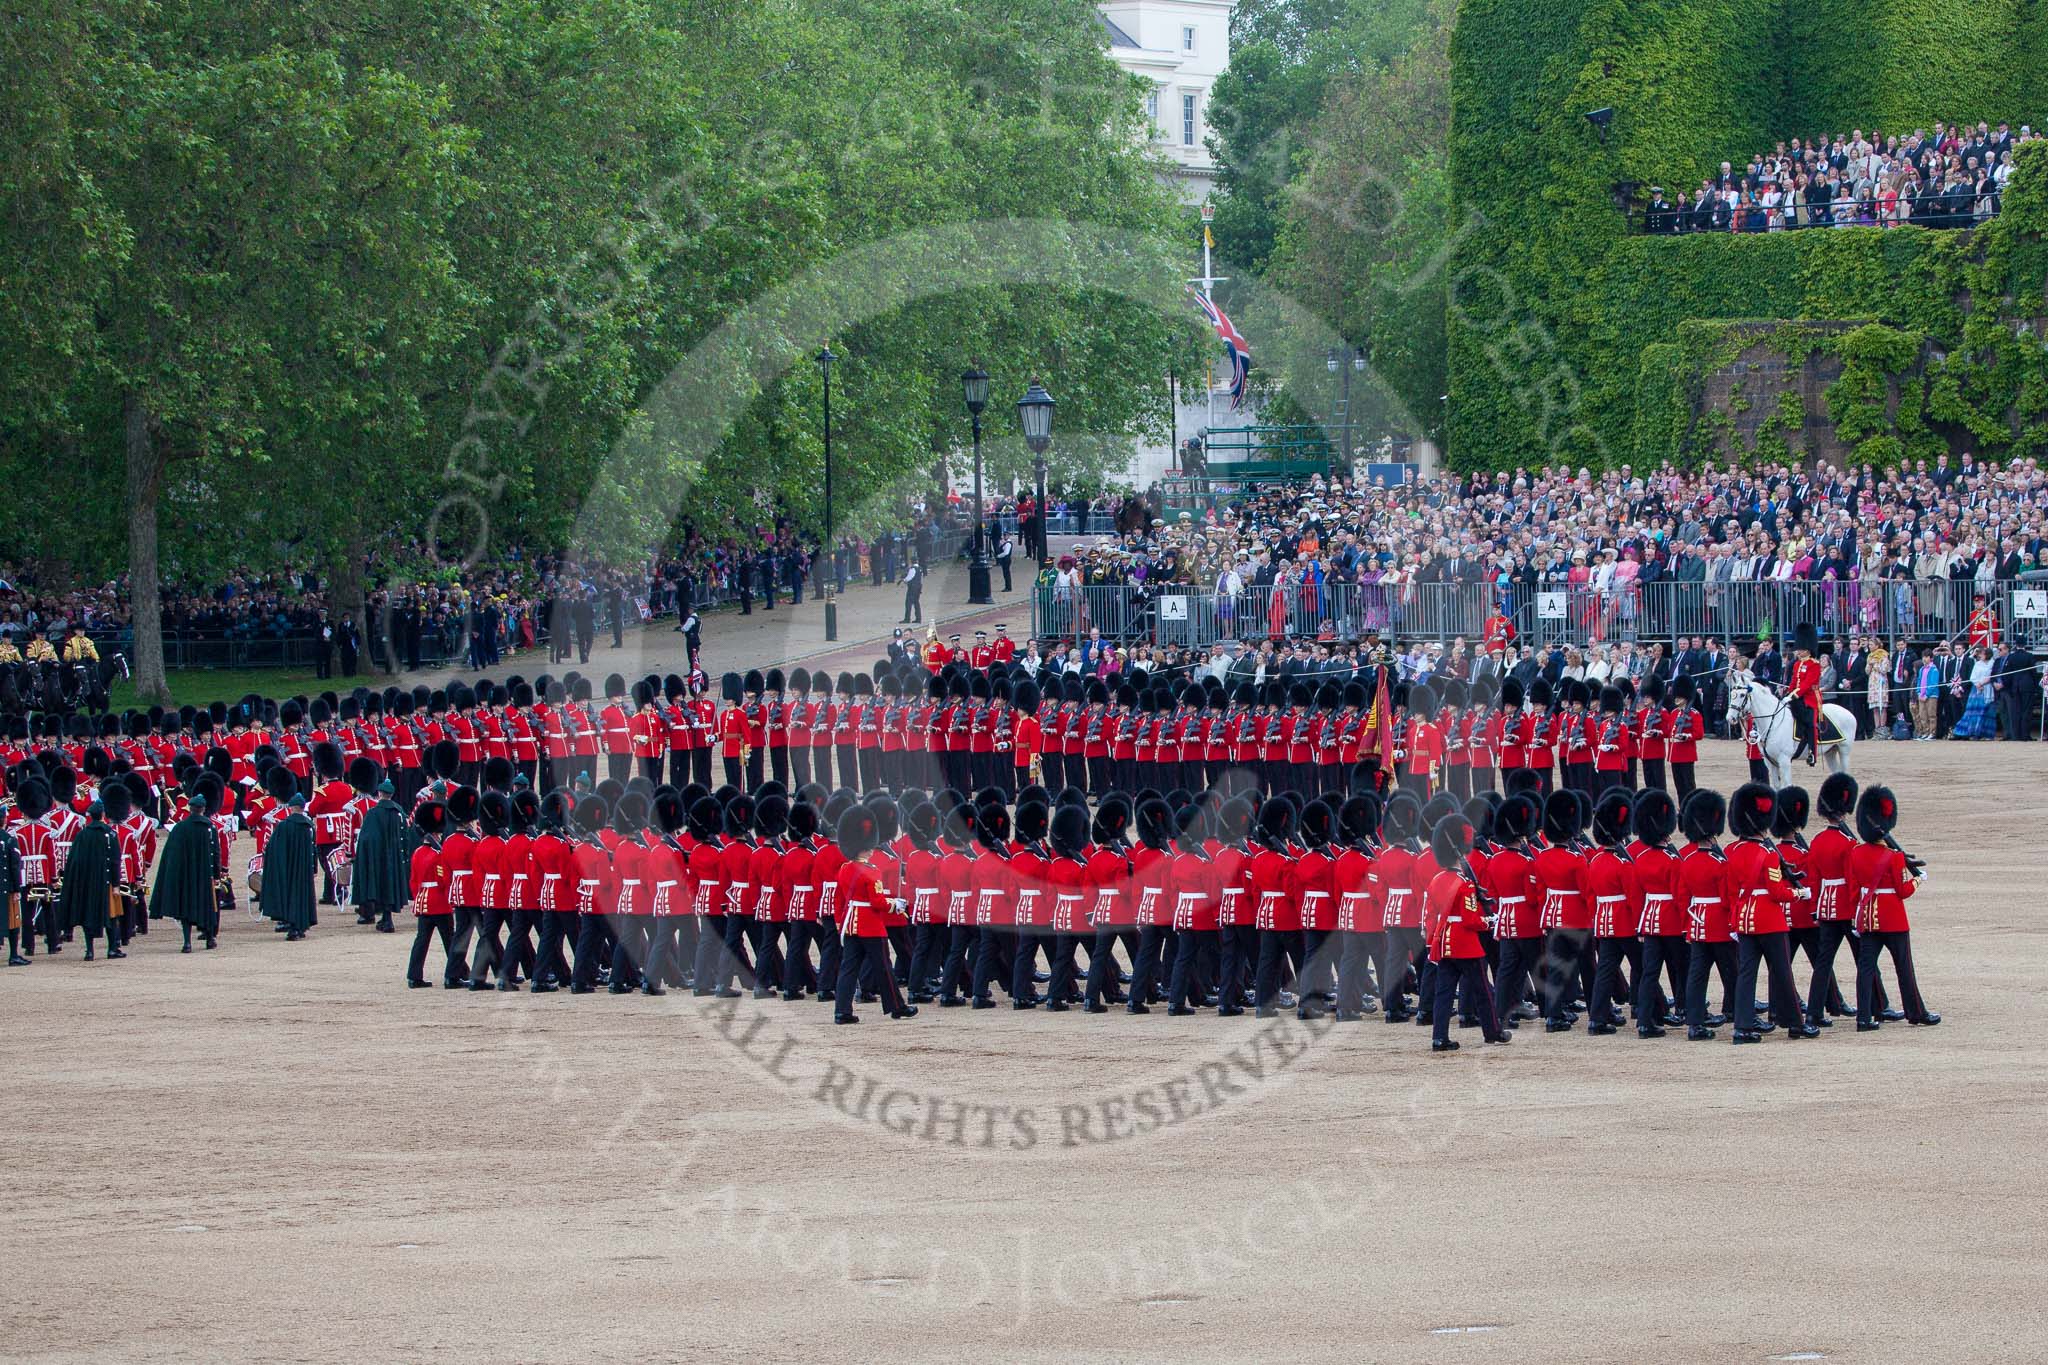 Trooping the Colour 2012: The Escort to the Colour is marching towards No. 6 Guard..
Horse Guards Parade, Westminster,
London SW1,

United Kingdom,
on 16 June 2012 at 11:23, image #324